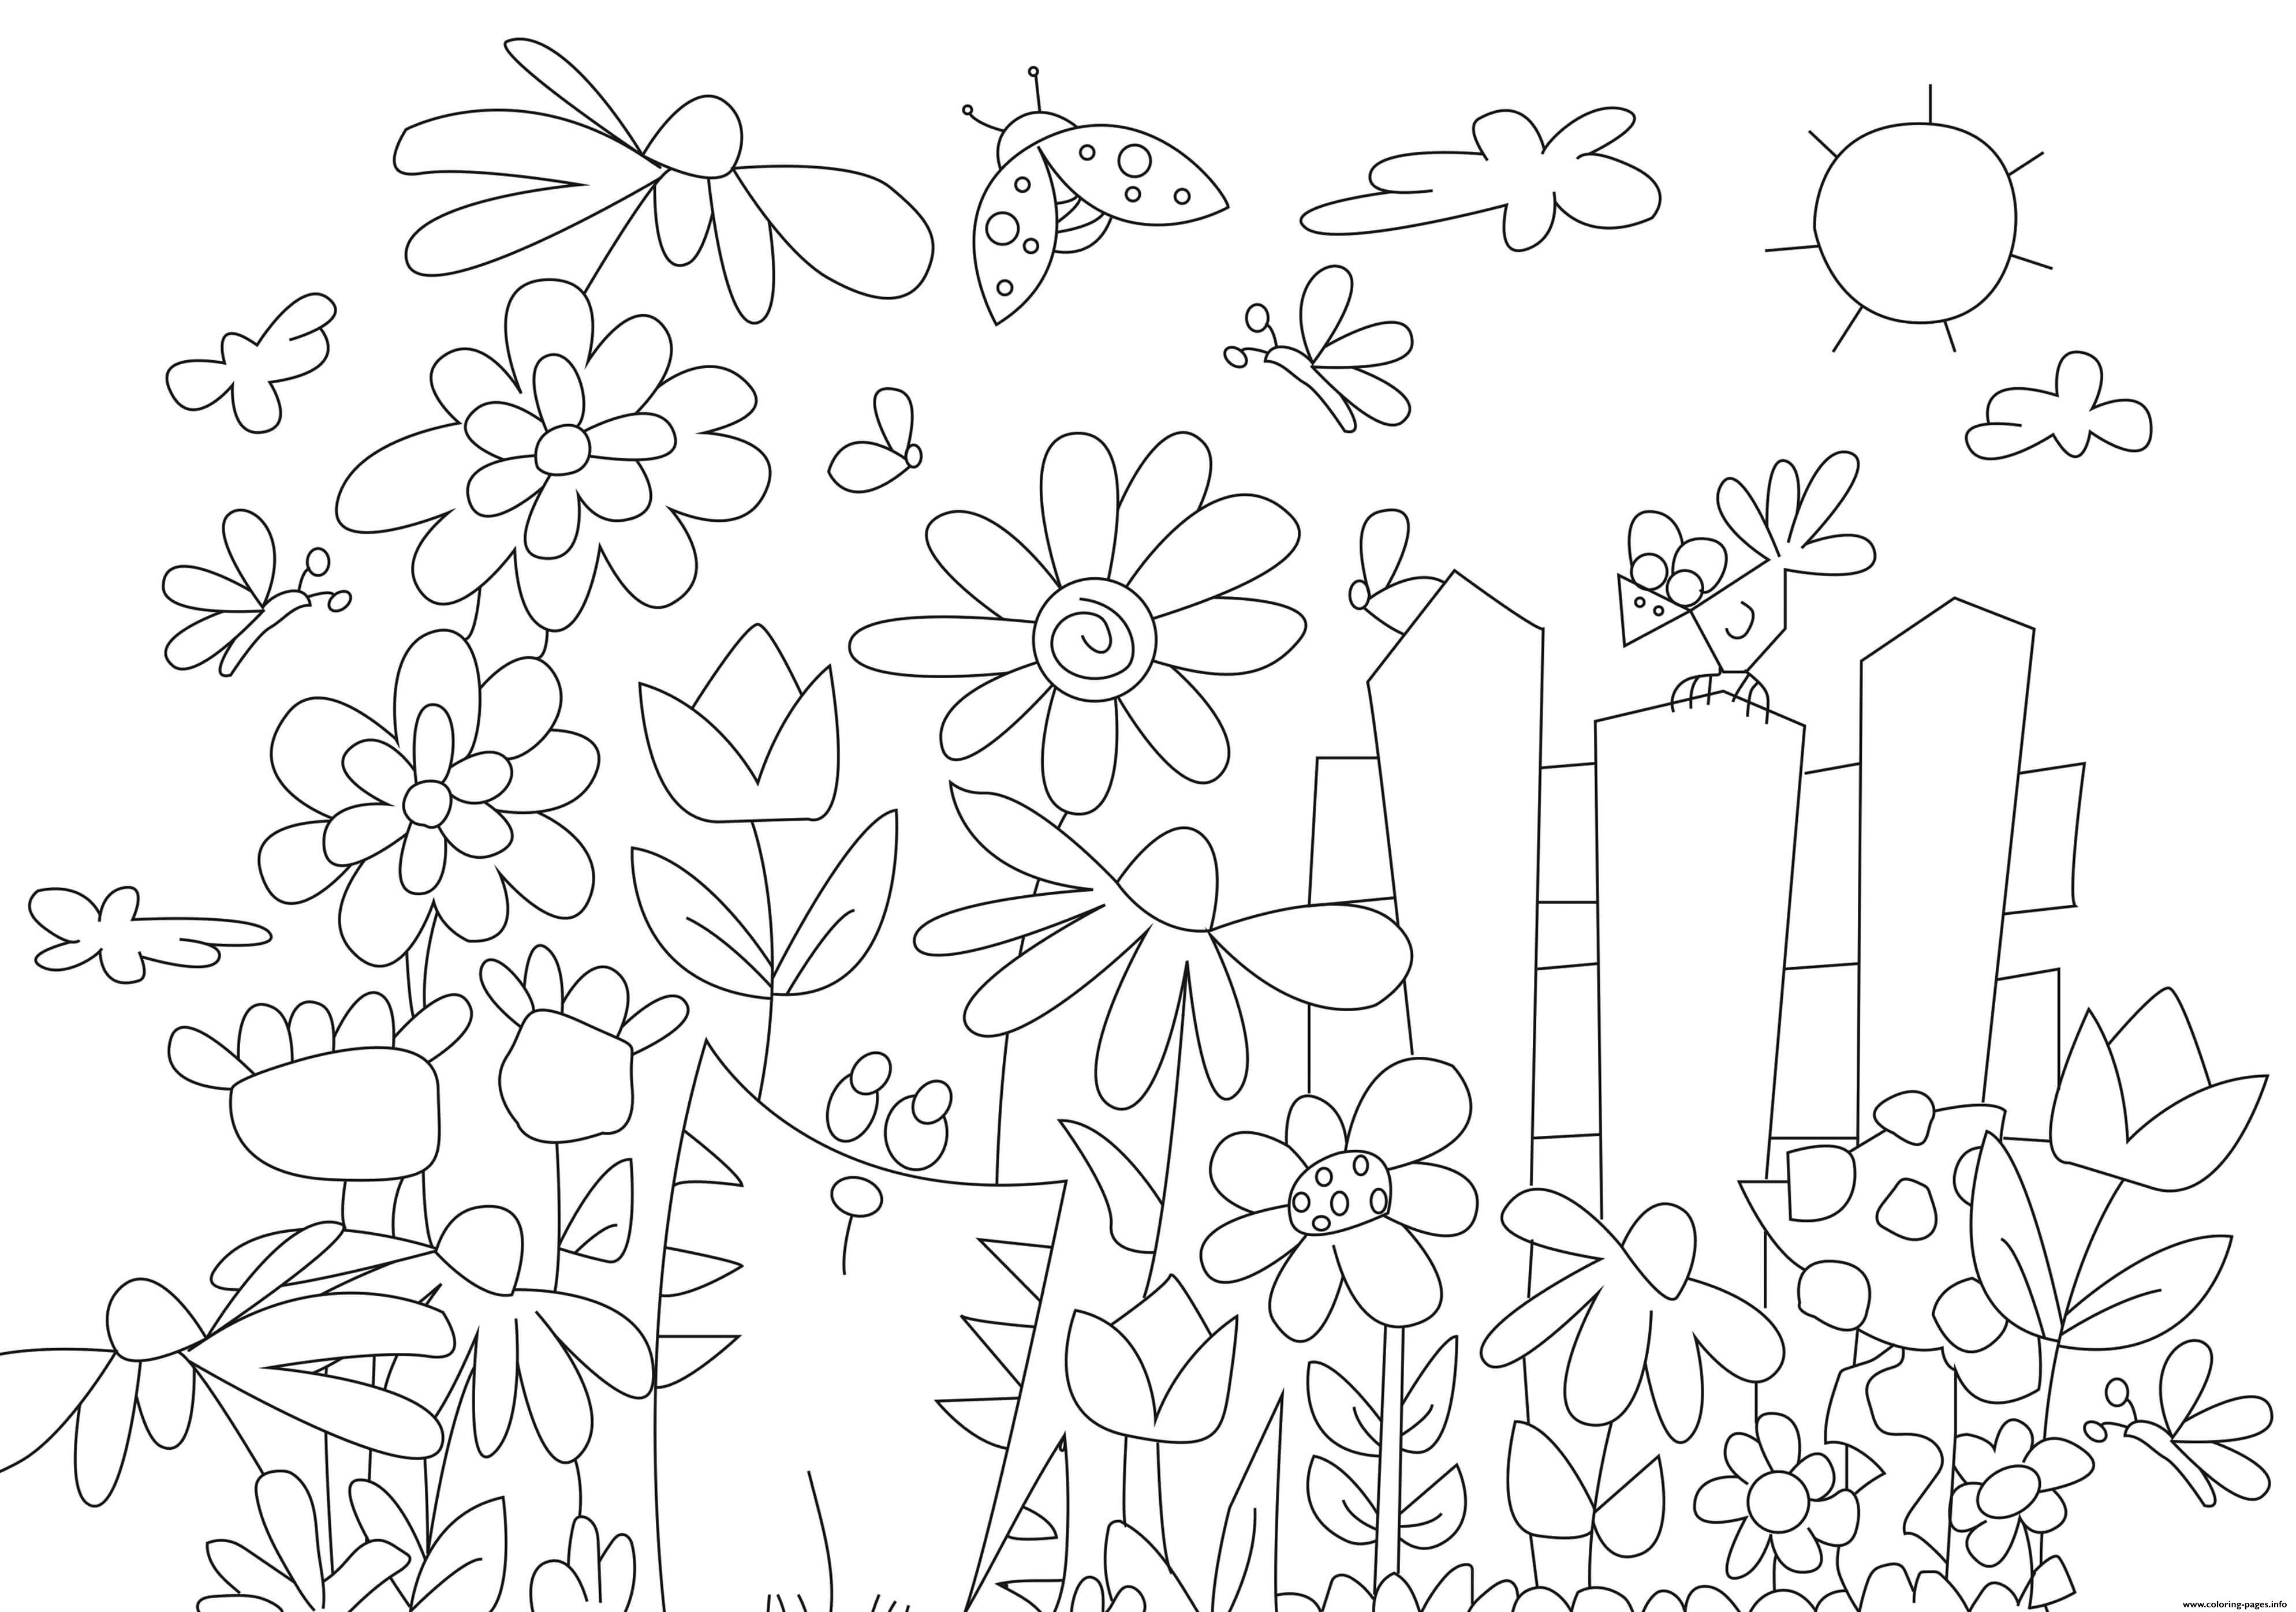 What is the title of this picture ? Flower Garden With Cat Coloring Pages Printable